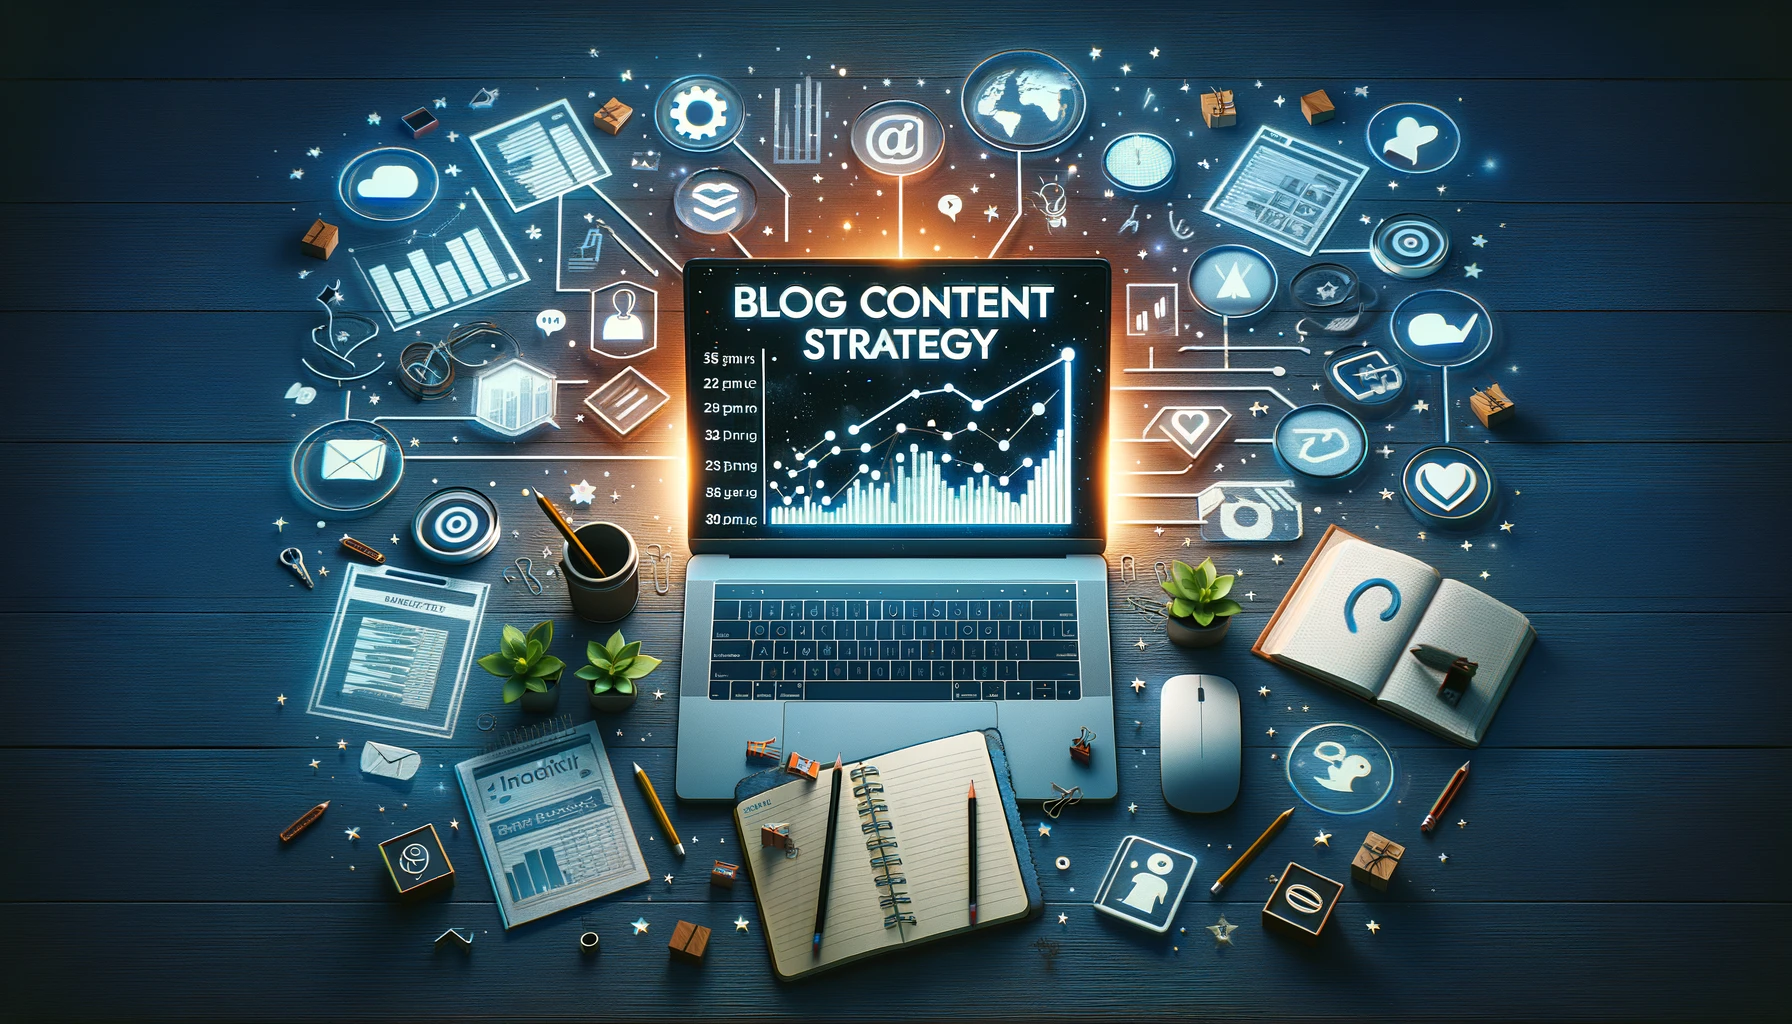 Scene depicting a digital workspace with an open laptop showing analytics, a notepad filled with creative ideas, and floating social media icons, embodying the essence of Blog Content Strategy.